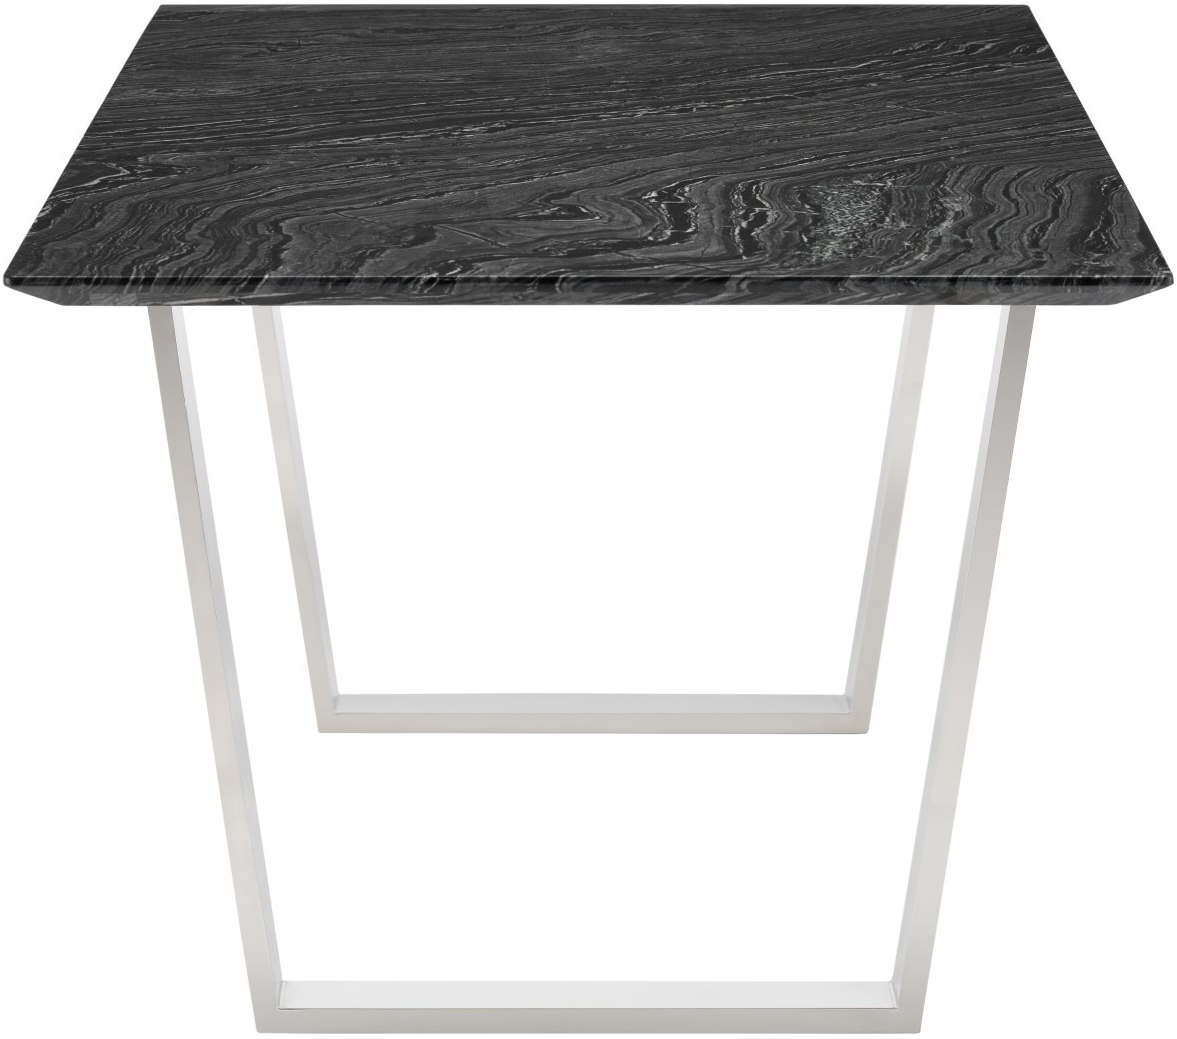 the nuevo catrine dining table black stainless steel